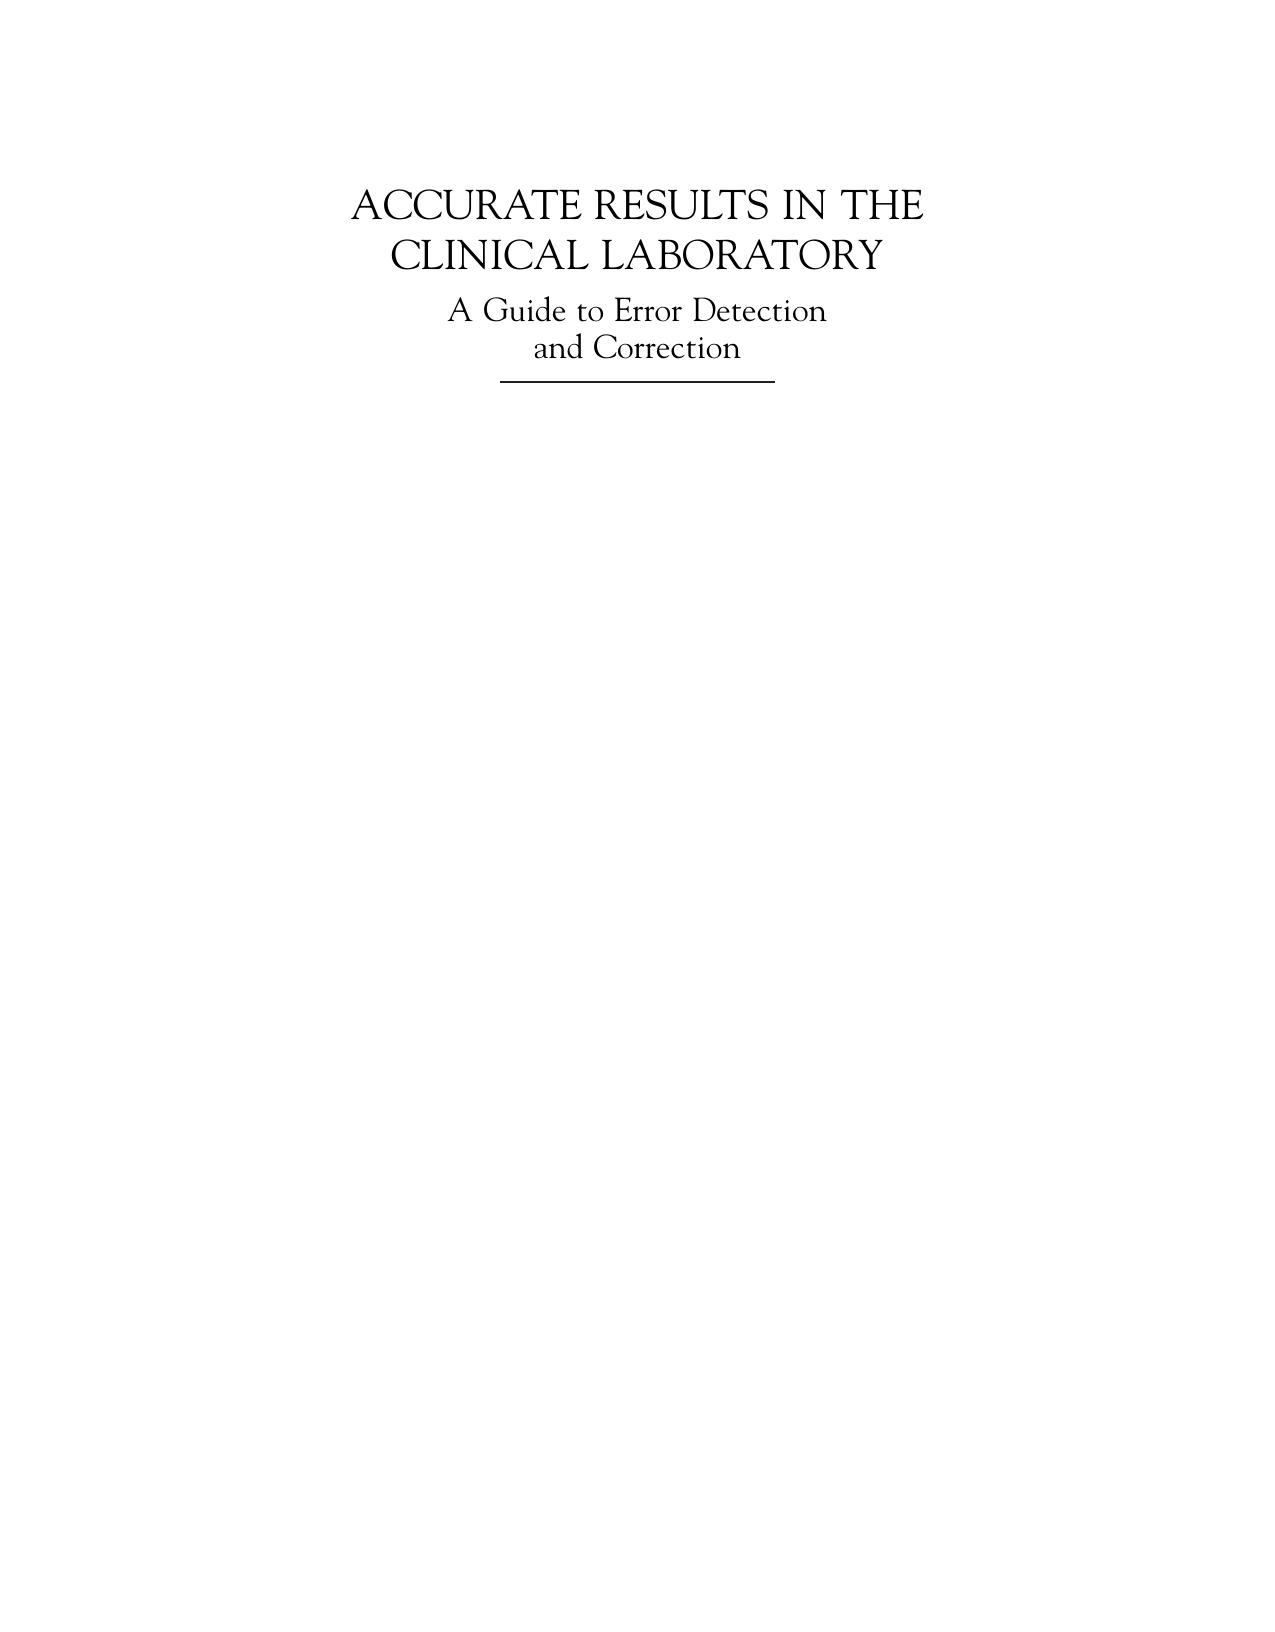 ACCURATE RESULTS IN THE CLINICAL LABORATORY 2013